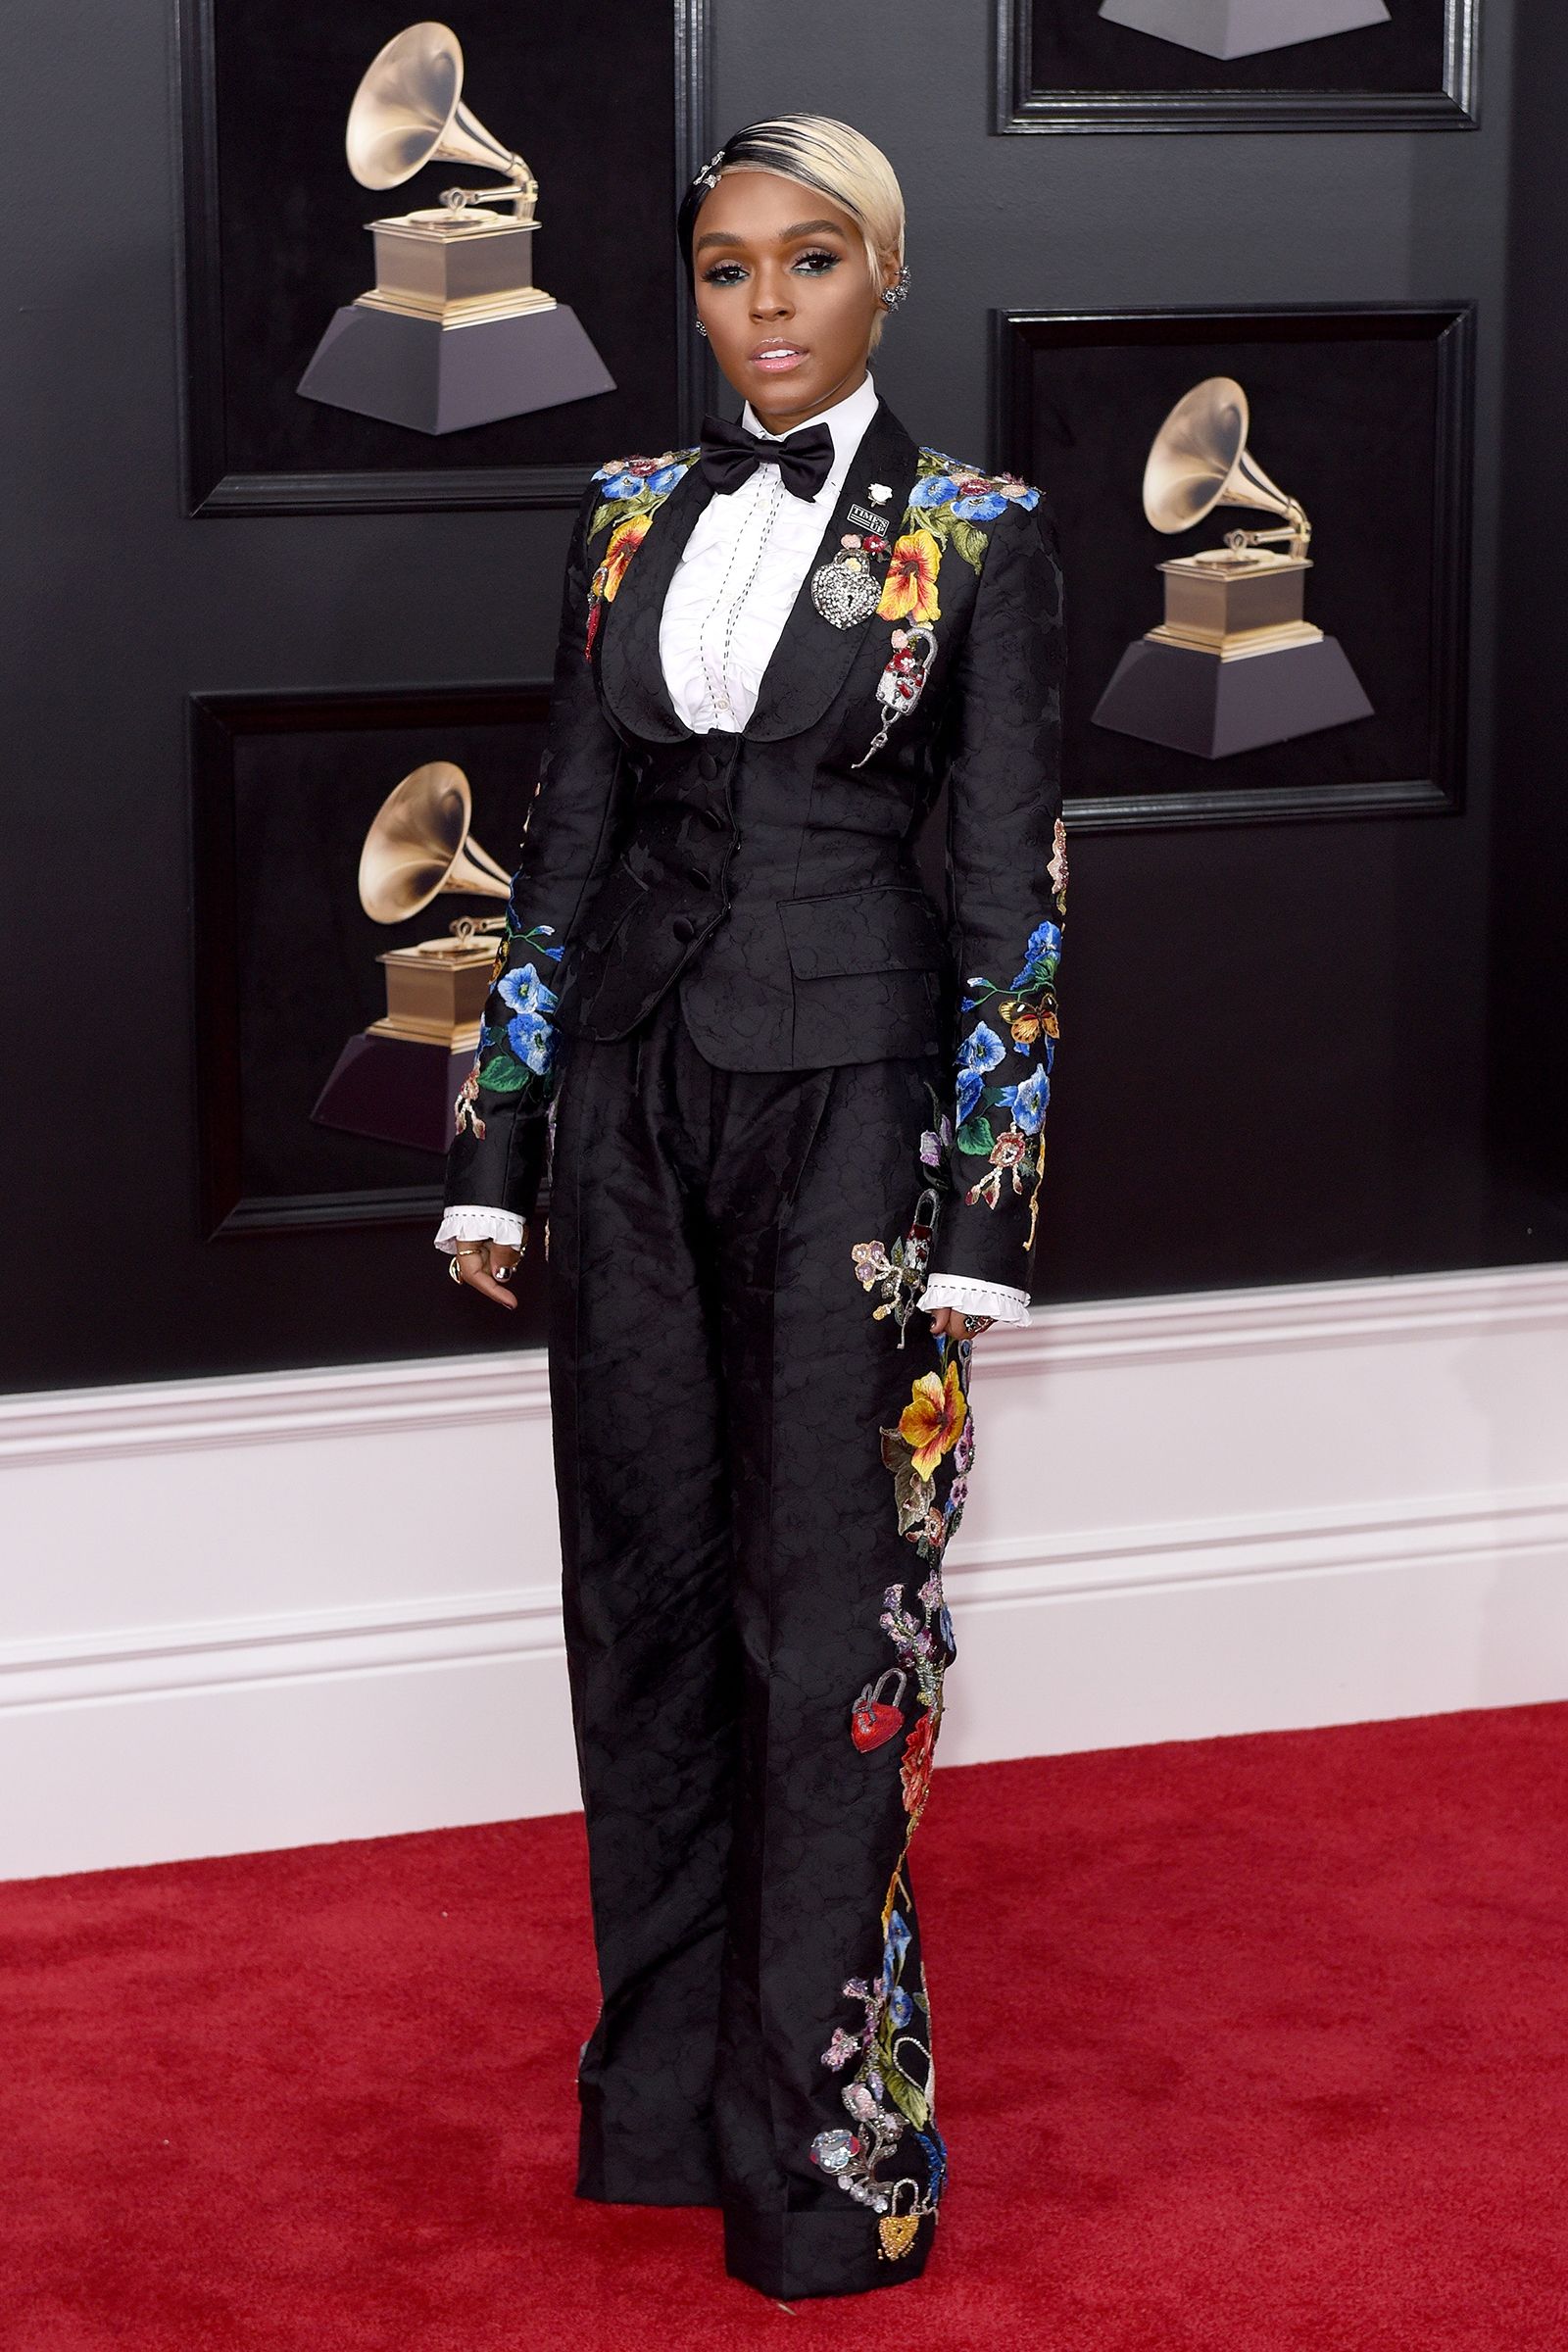 Janelle Monae attends the 60th Annual GRAMMY Awards - Arrivals at Madison Square Garden on January 28, 2018 in New York City.